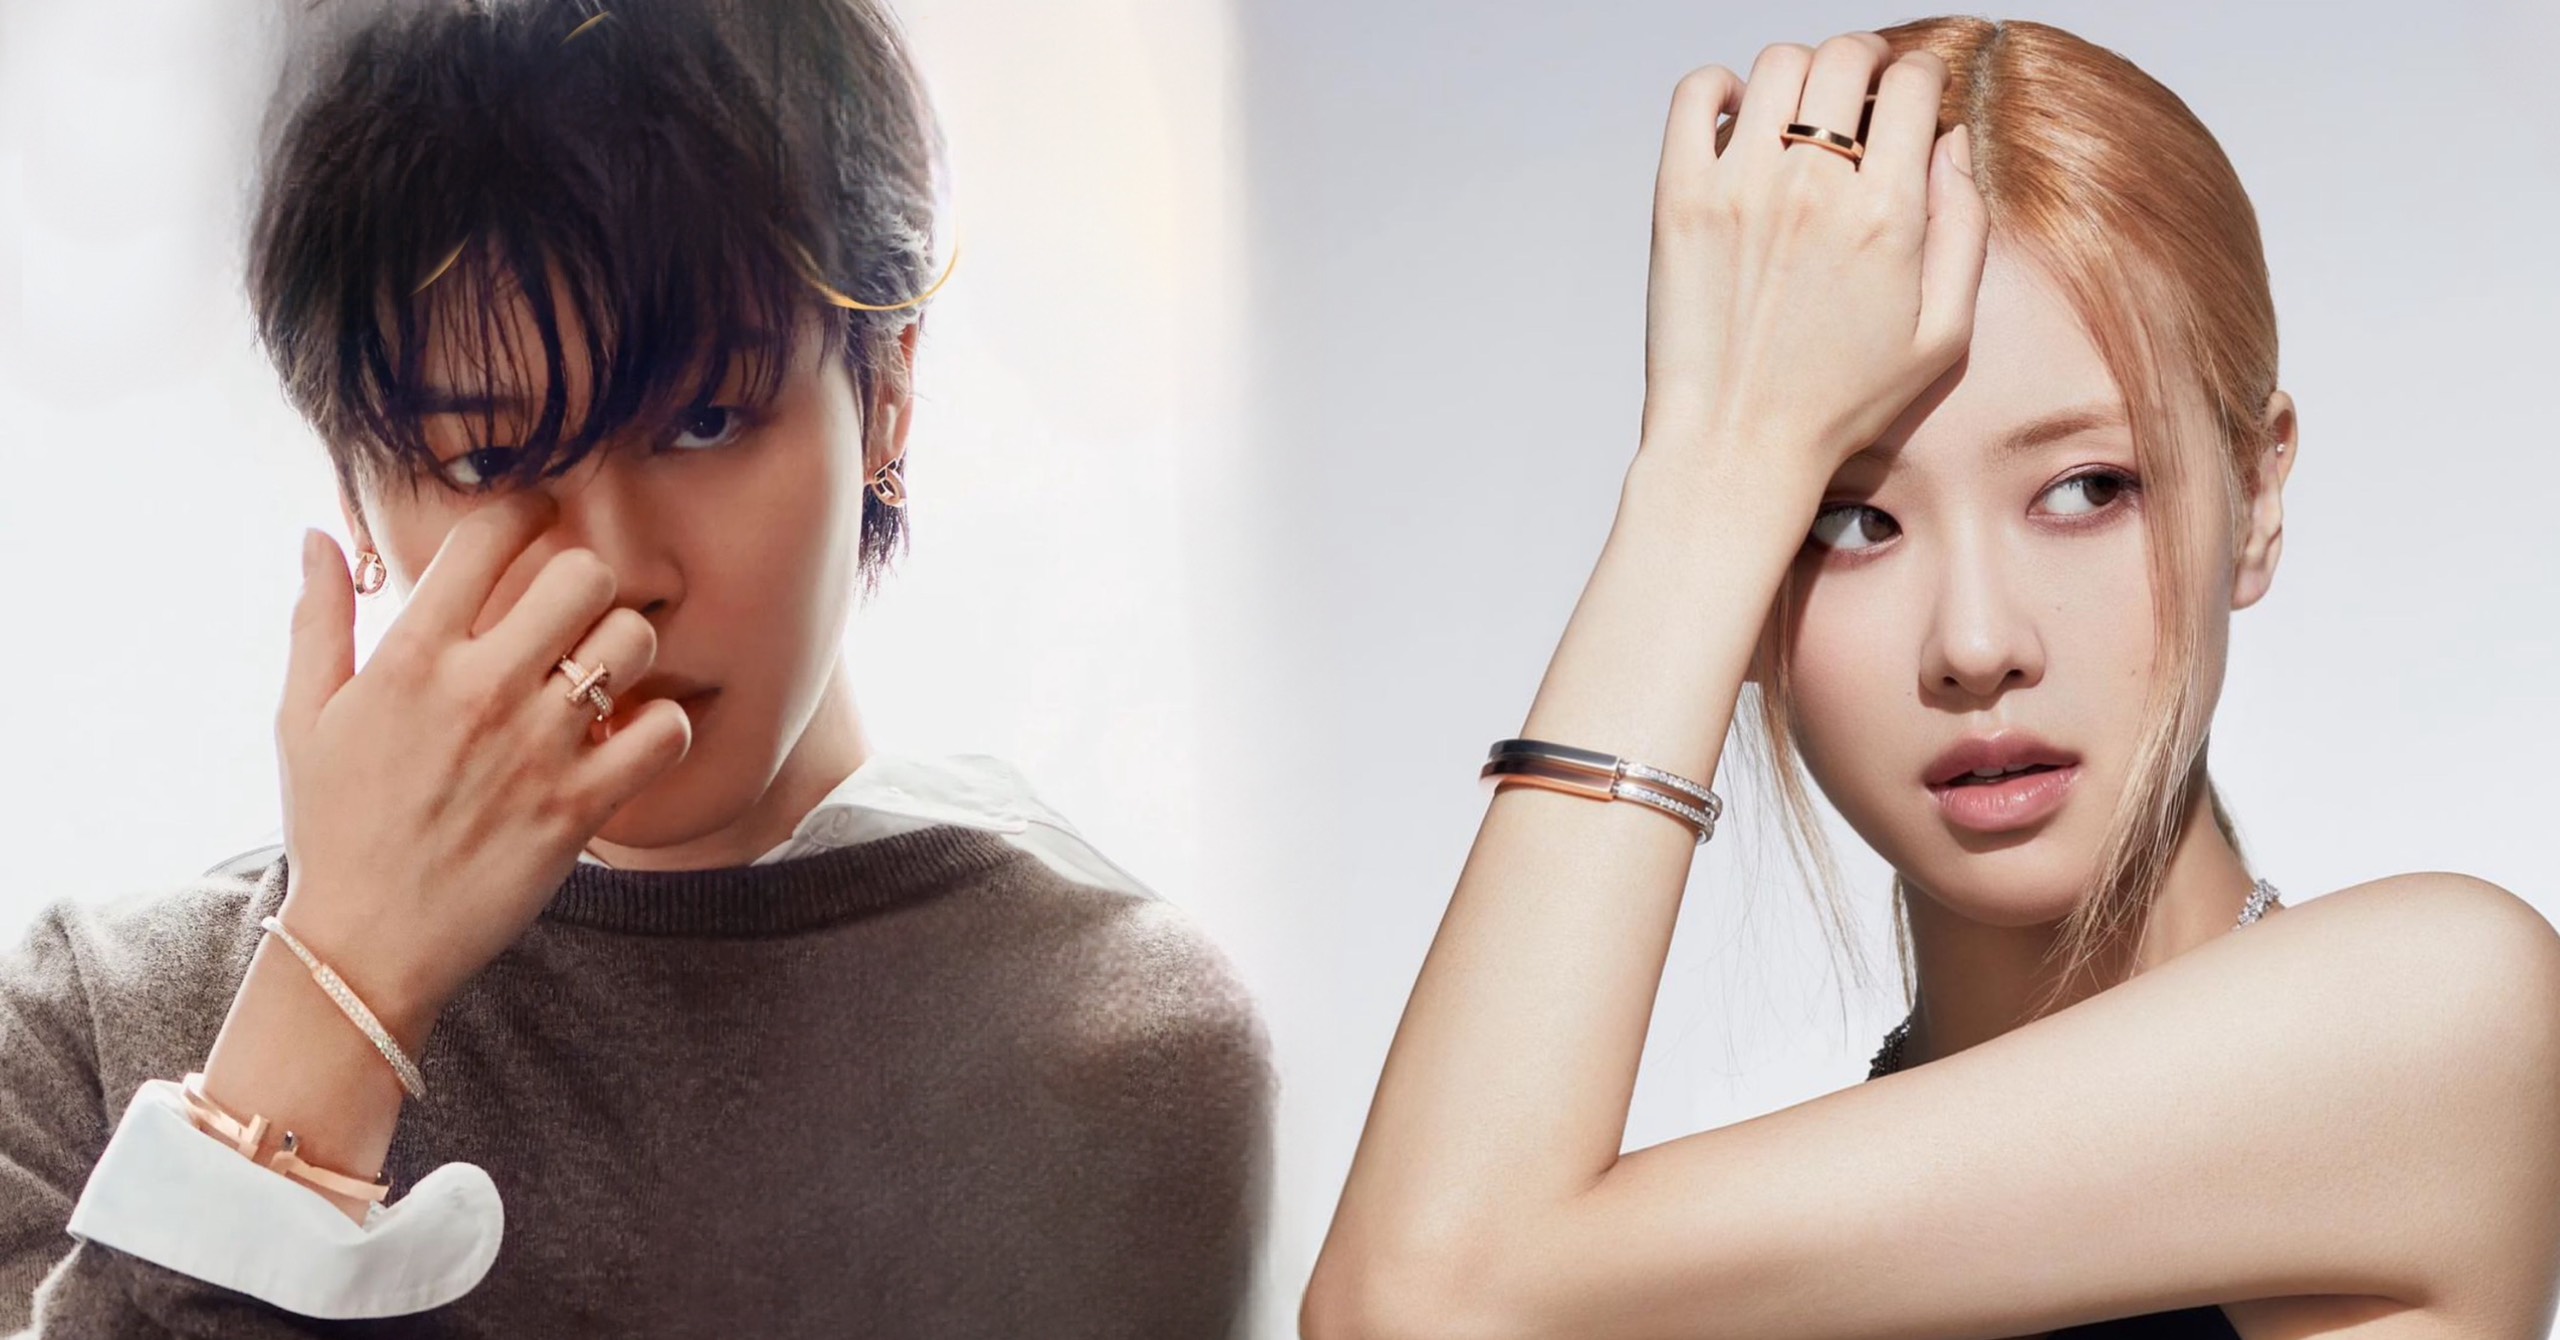 Blackpink's Rosé and BTS' Jimin star in new Tiffany & Co campaign